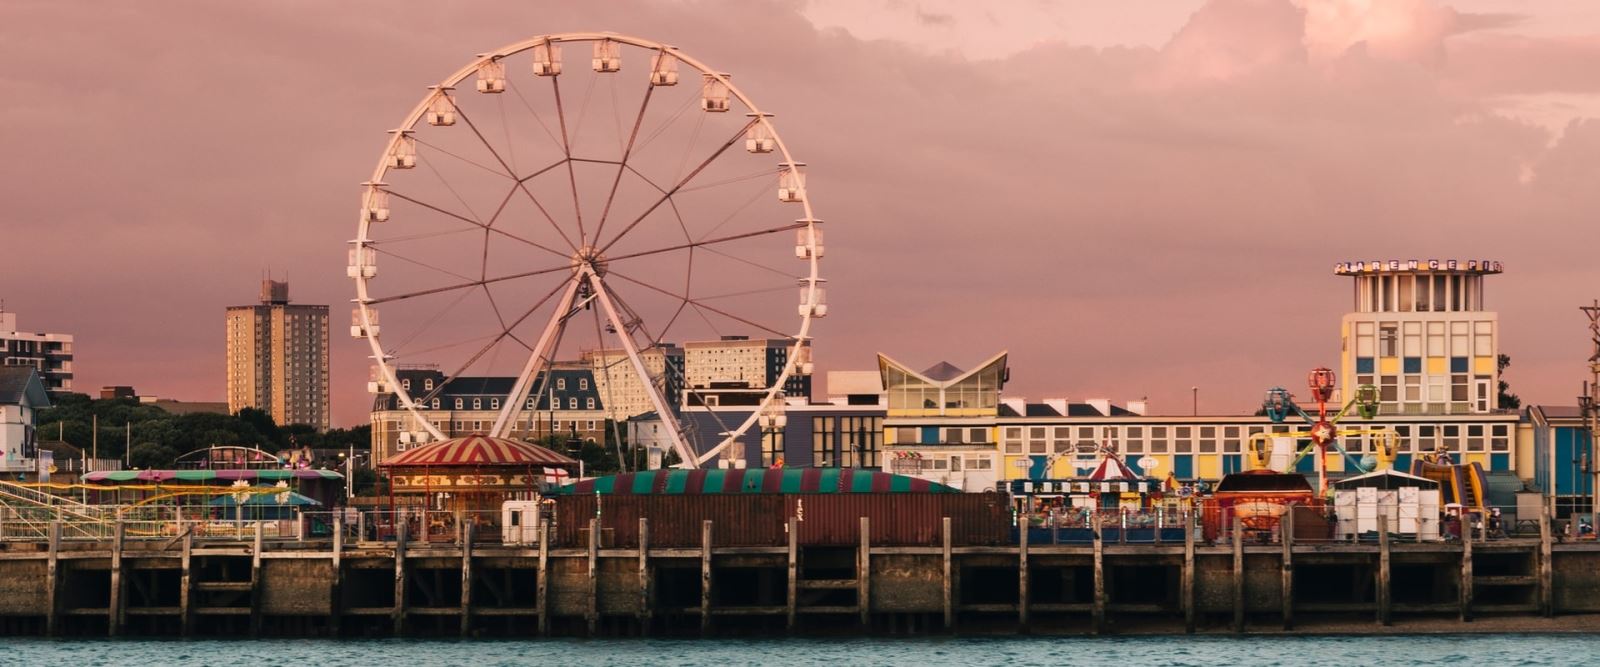 Funfair at Clarence Pier